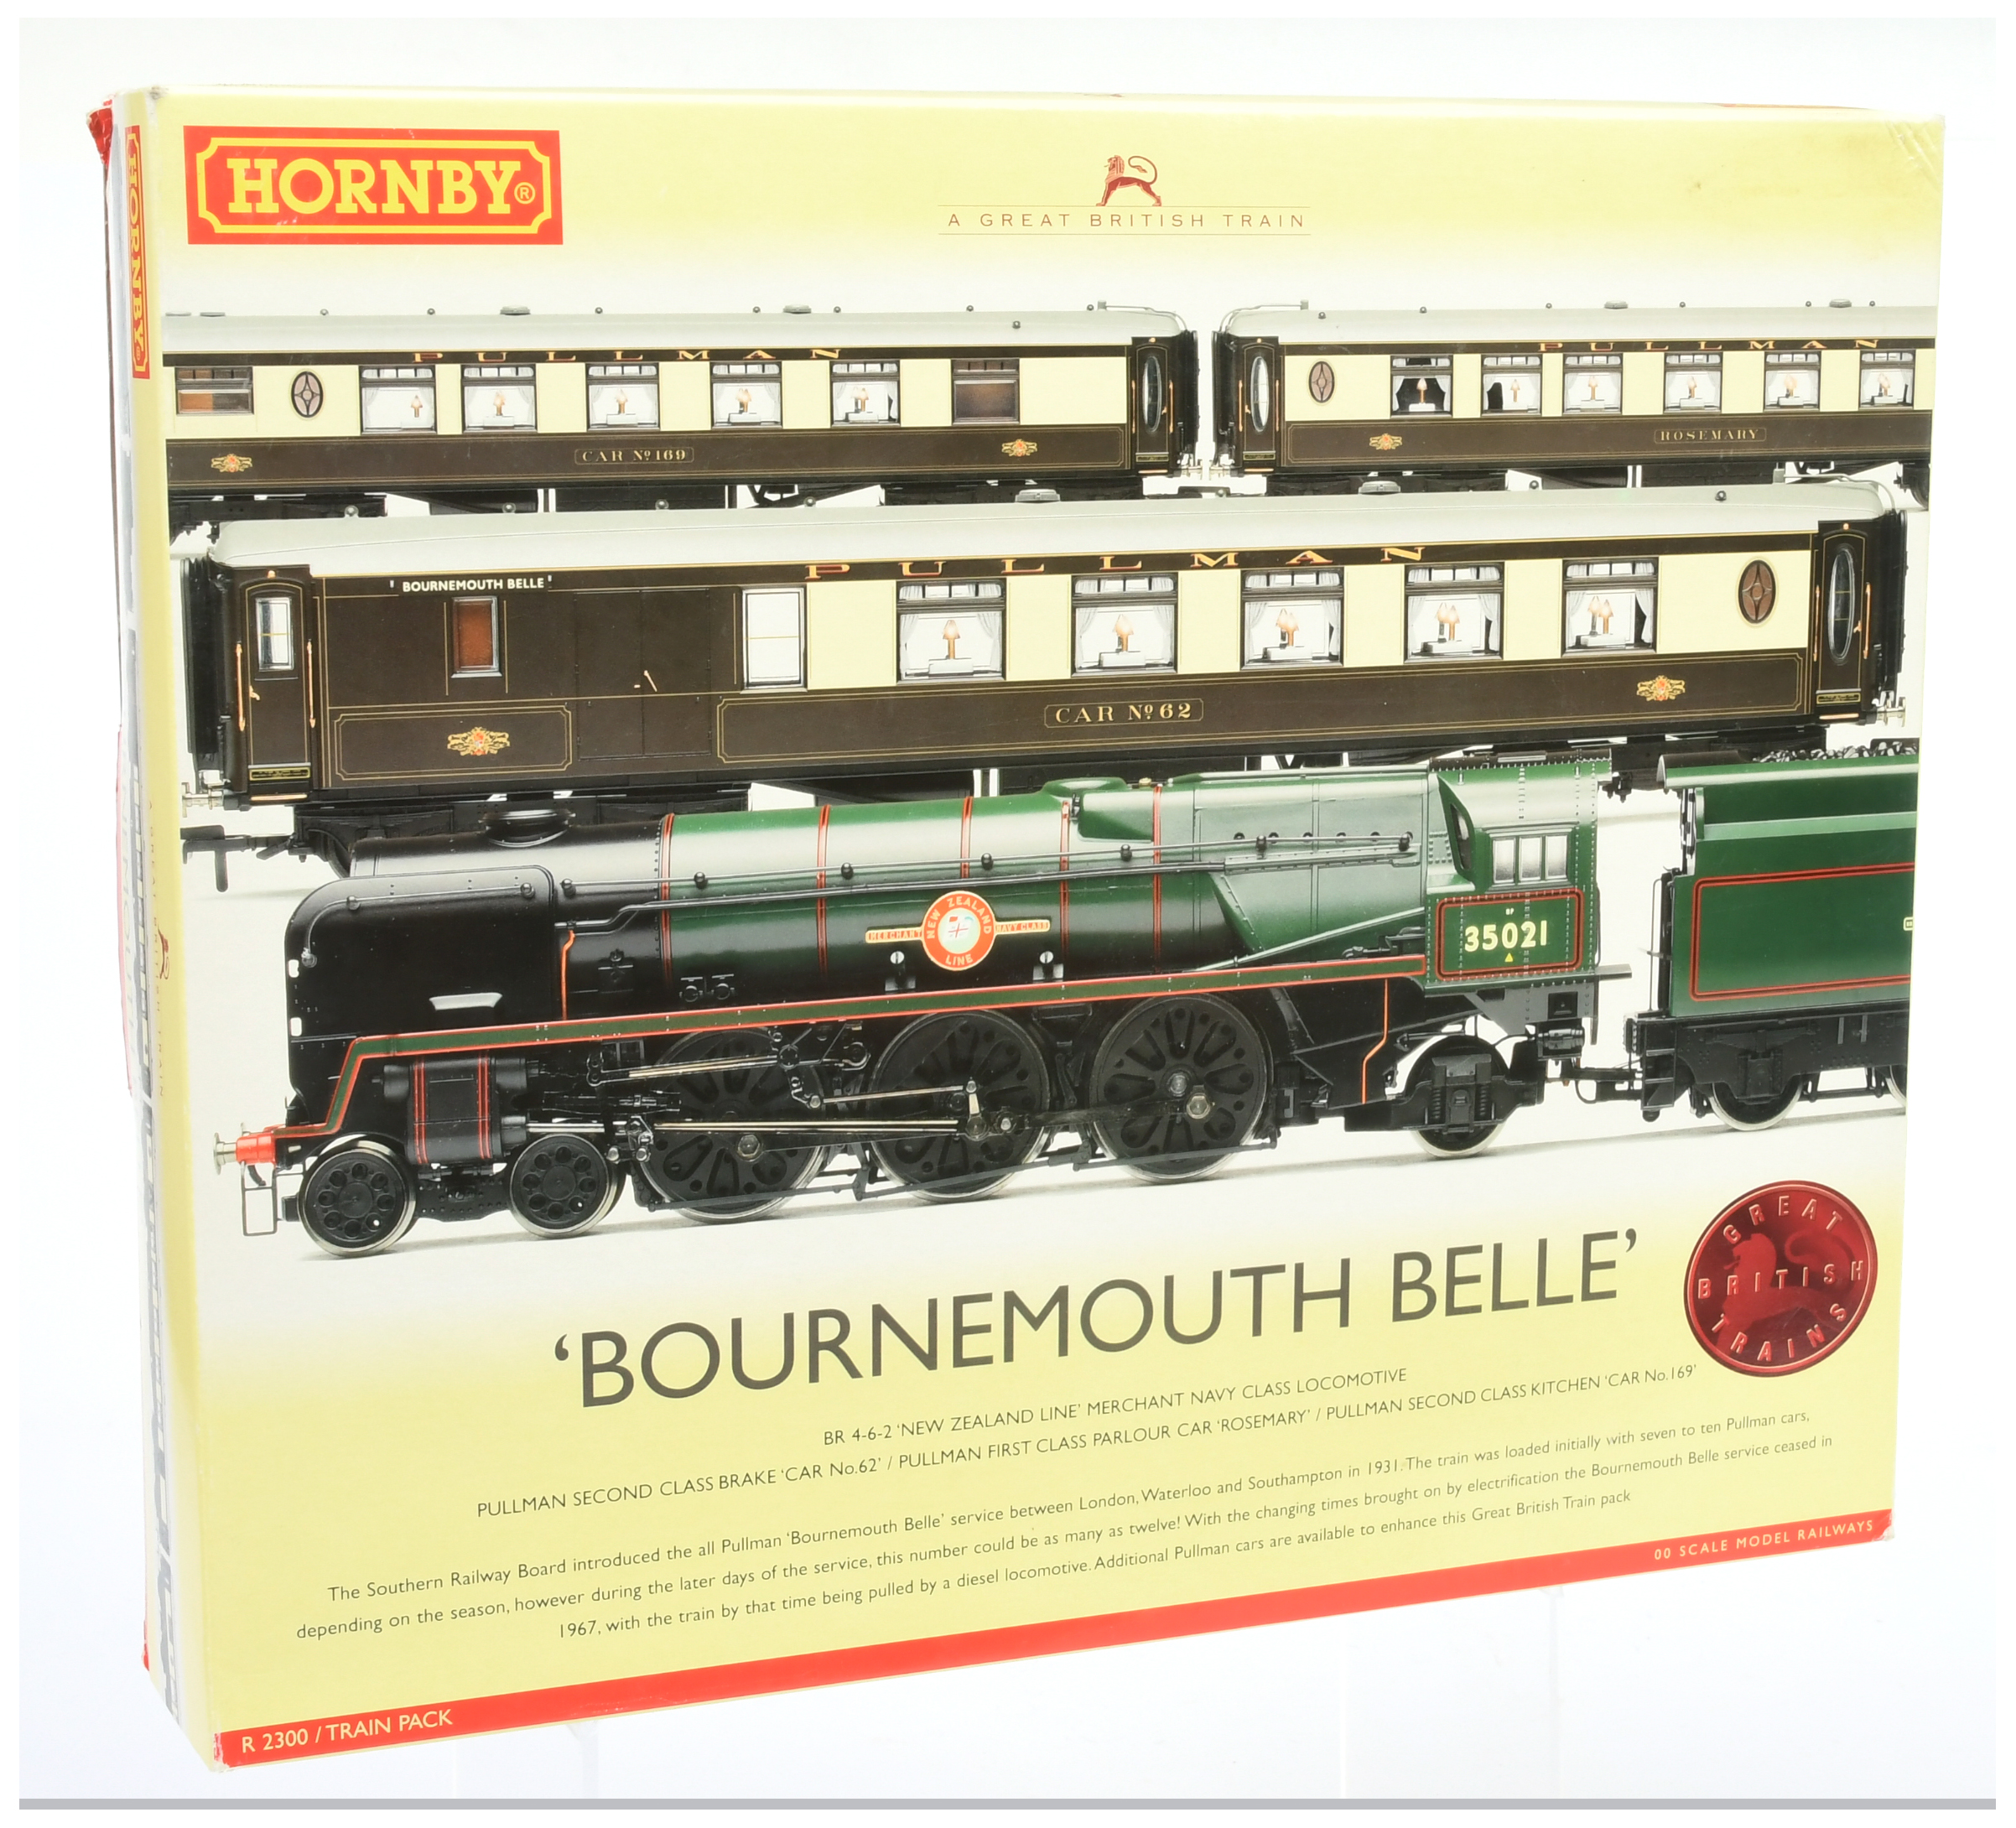 Hornby (China) R2300 "Bournemouth Belle" Train Pack 